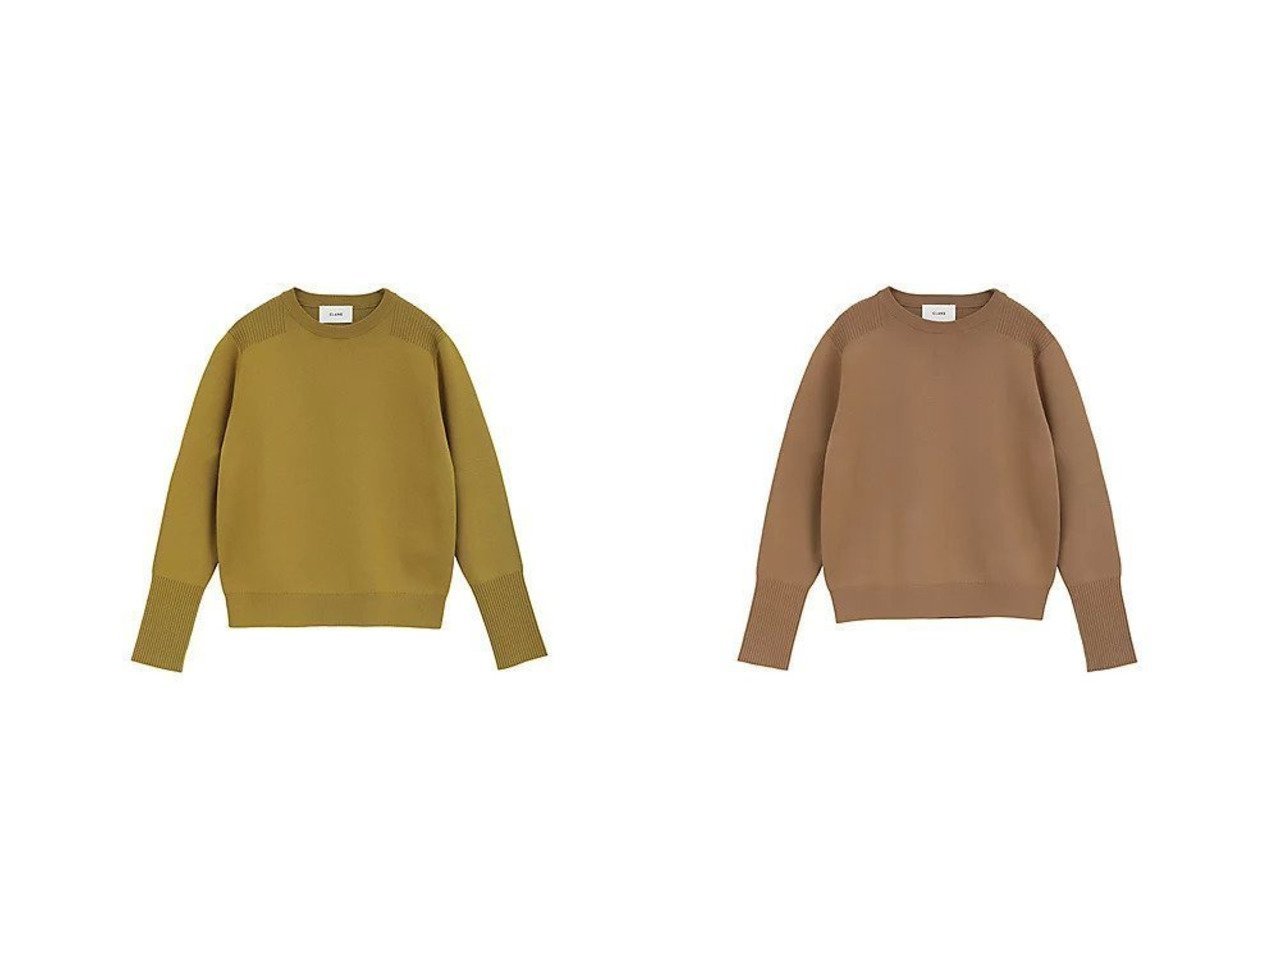 CLANE/クラネ】のBASIC COMPACT KNIT TOPS 【トップス、カットソー